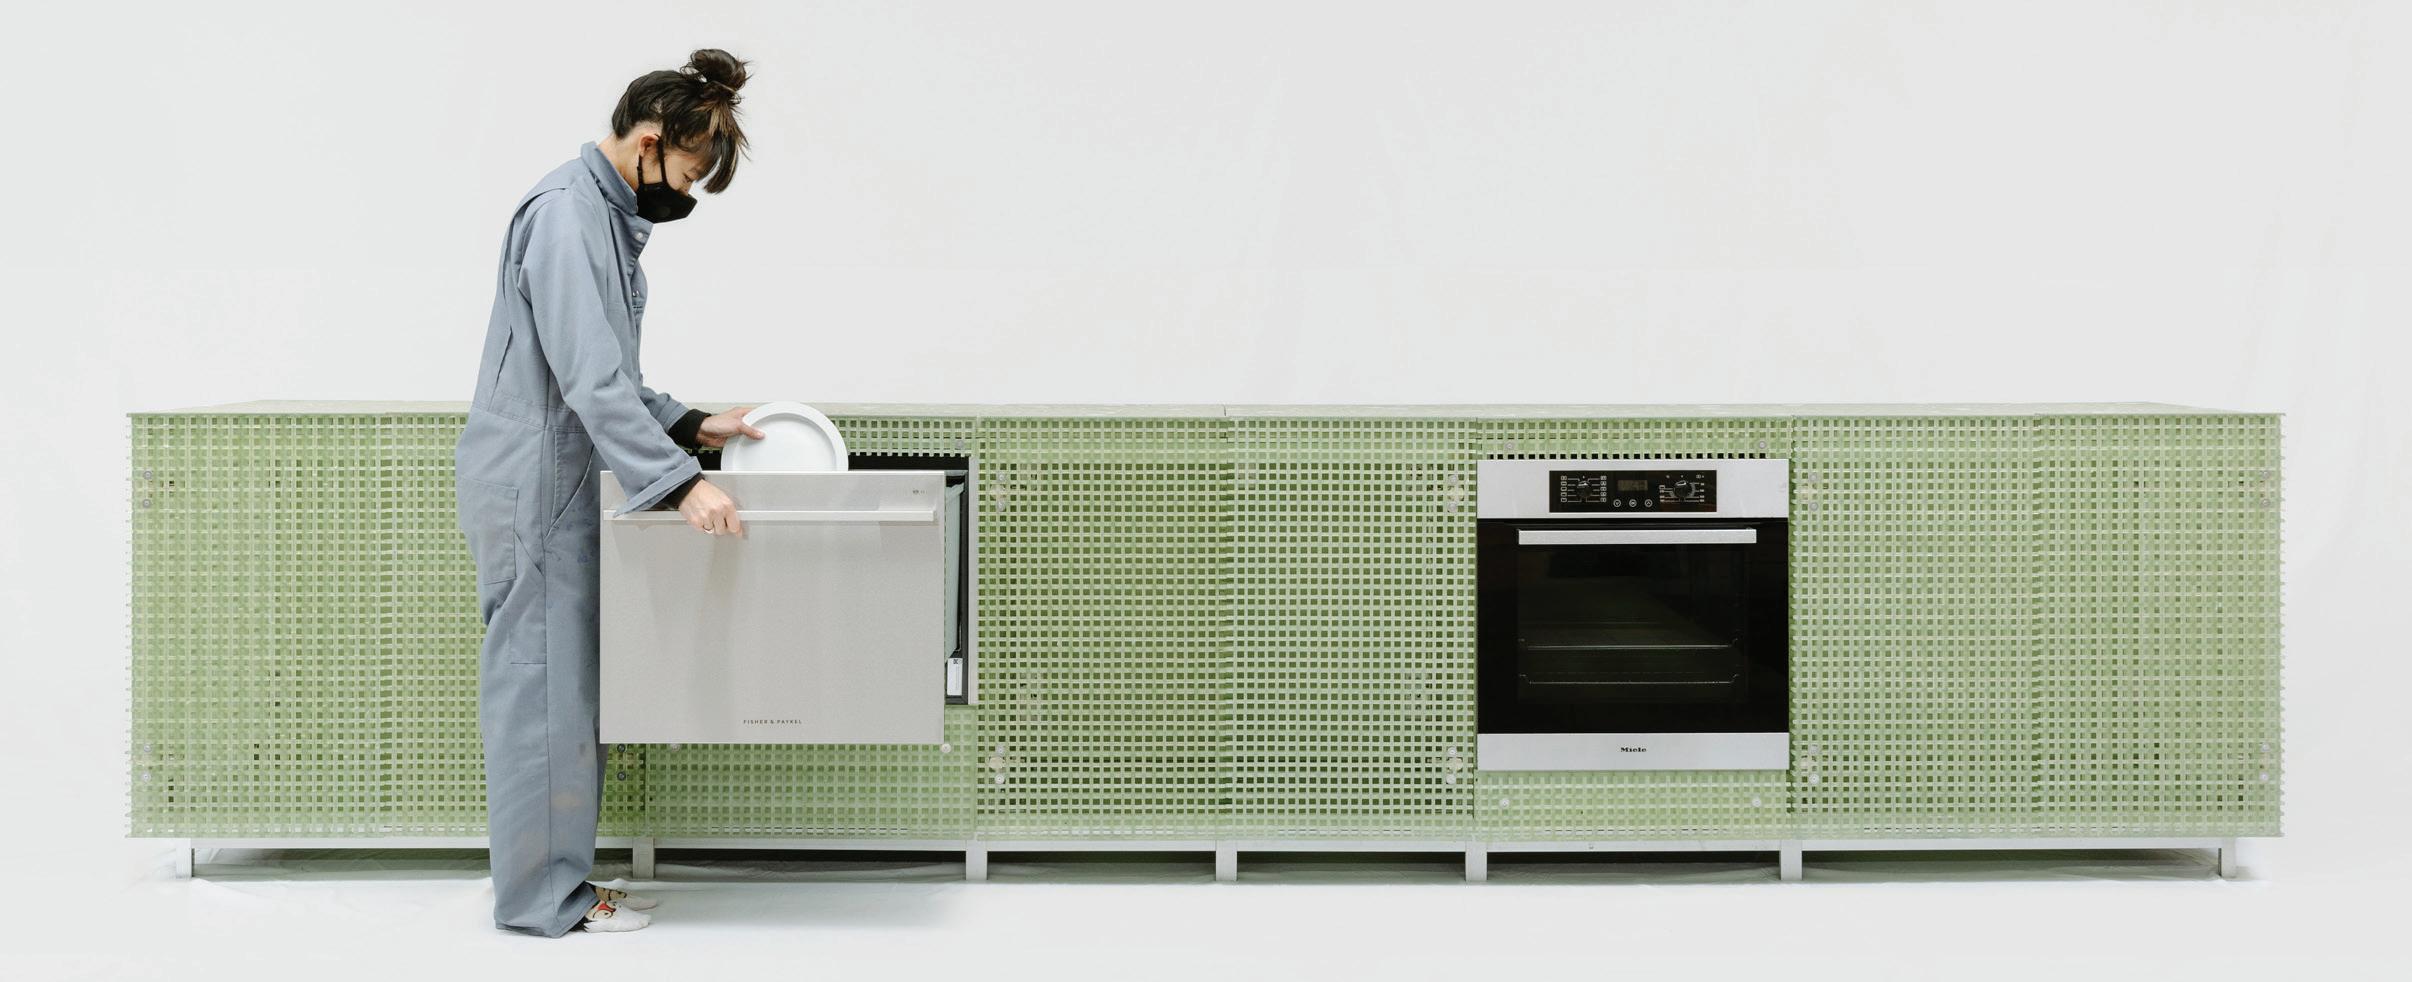 A woman stacks a dishwasher in a kitchen made of recycled materials.